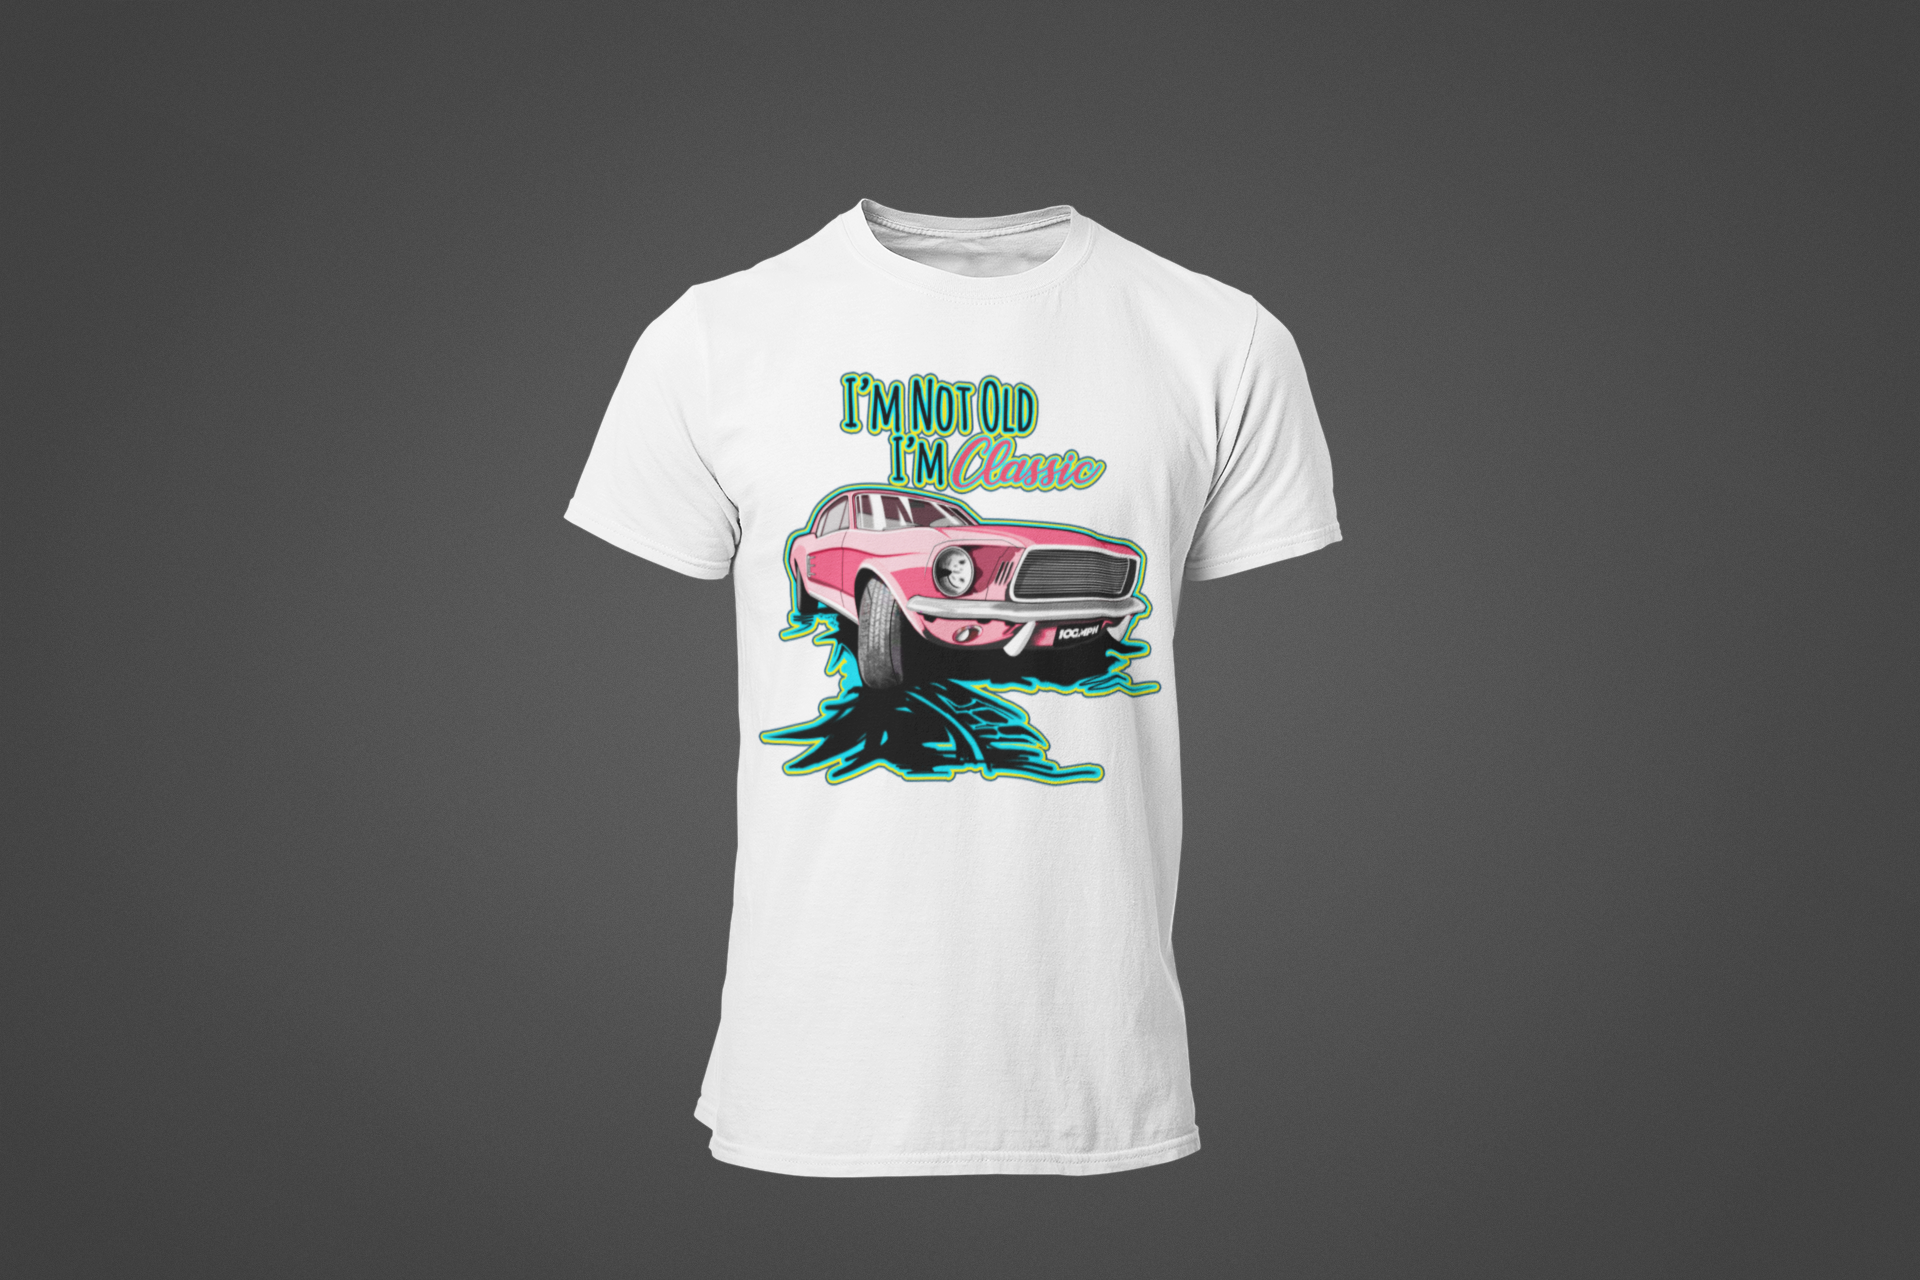 A white tee shirt with an image of a Ford Mustang, and text reading "I'm not old, I'm Classic"